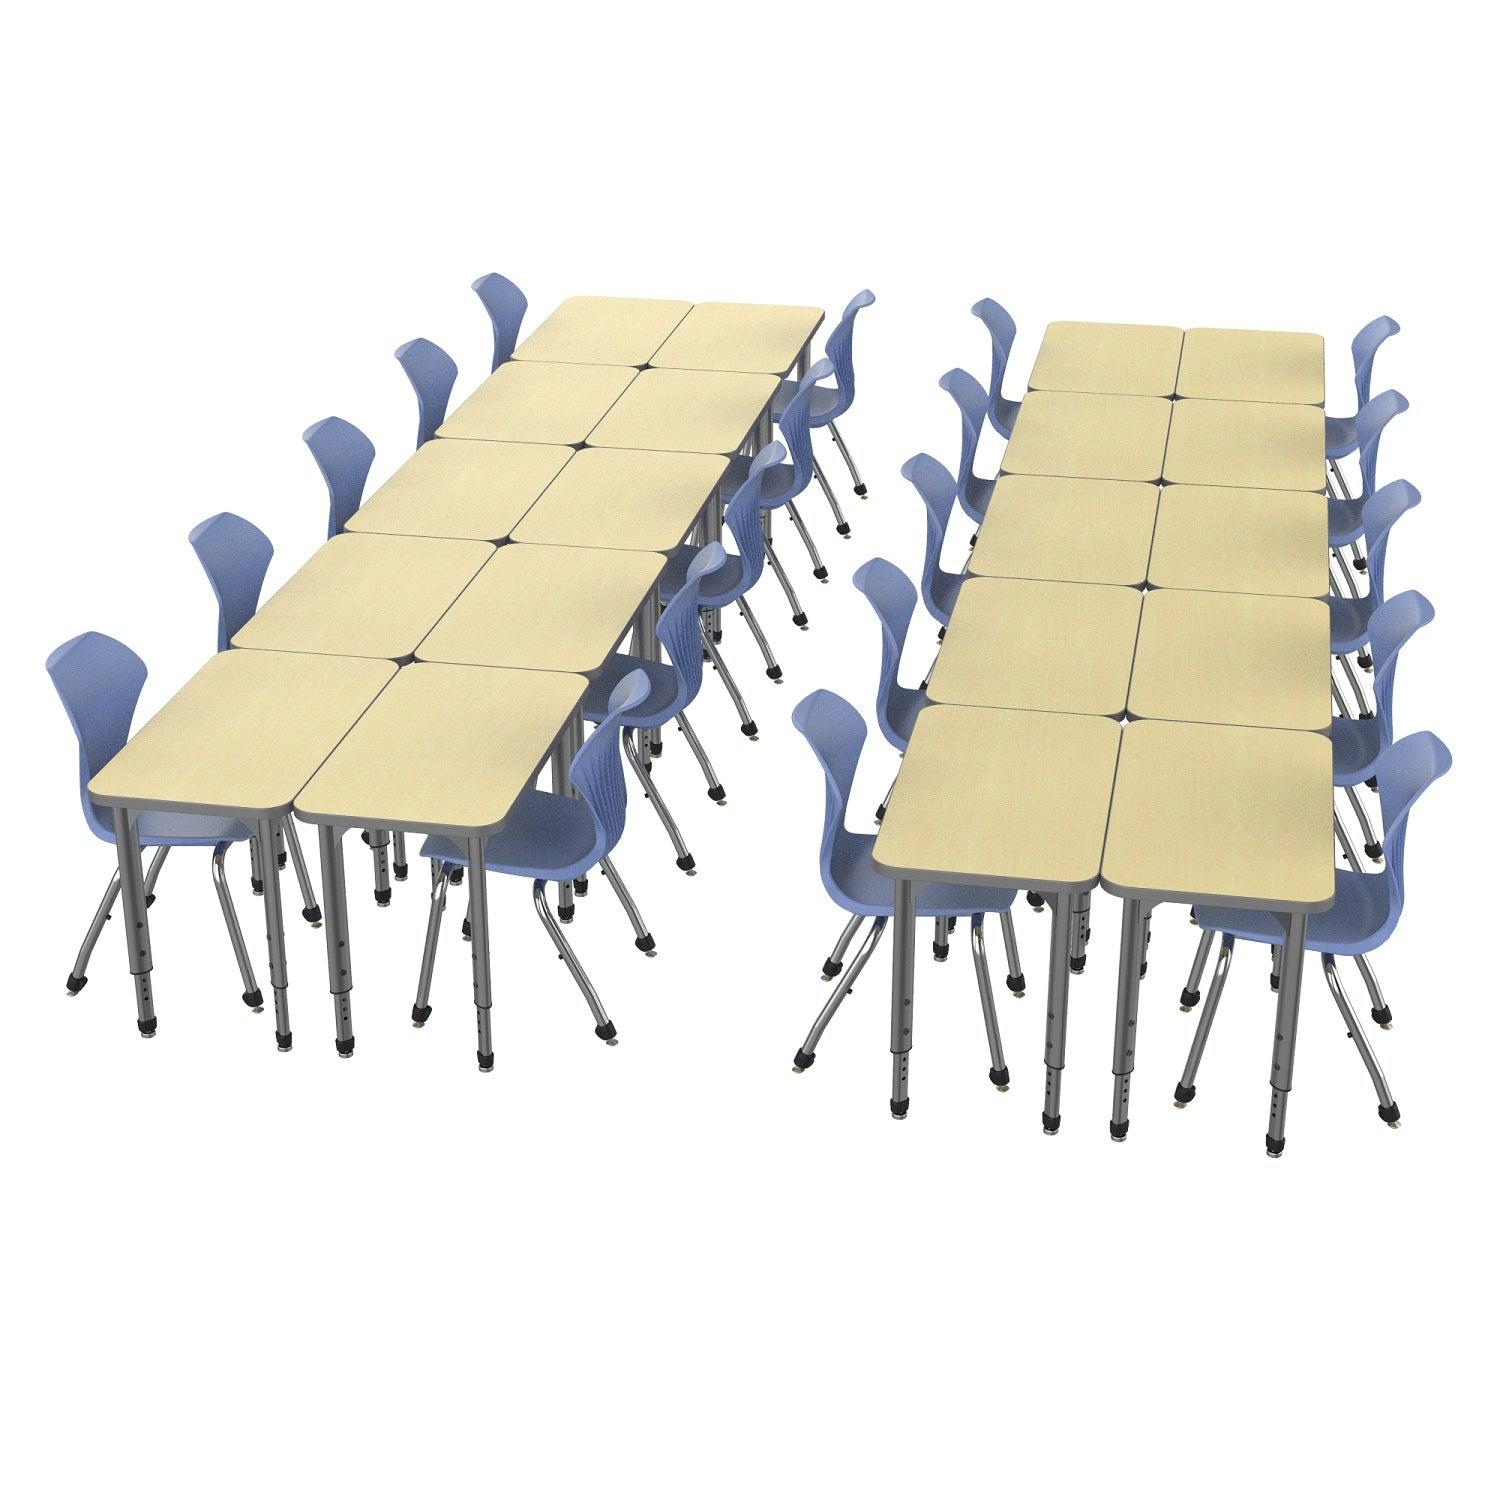 Apex Classroom Desk and Chair Package, 20 Rectangle Collaborative Student Desks, 20" x 36", with 20 Apex Stack Chairs